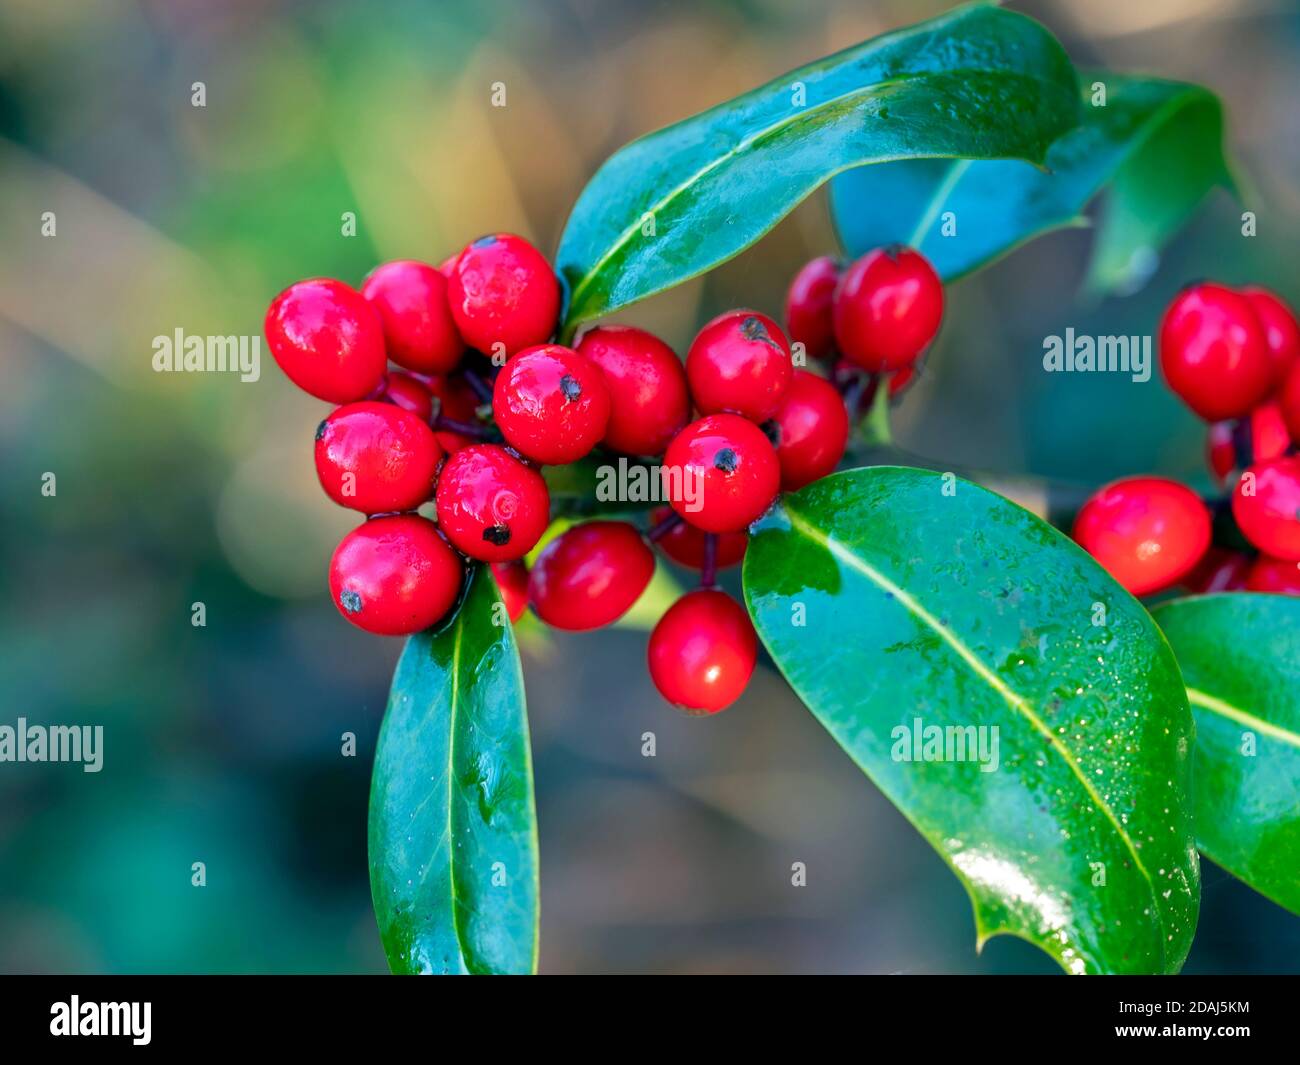 Closeup of shiny red holly berries and green leaves after a rain shower Stock Photo